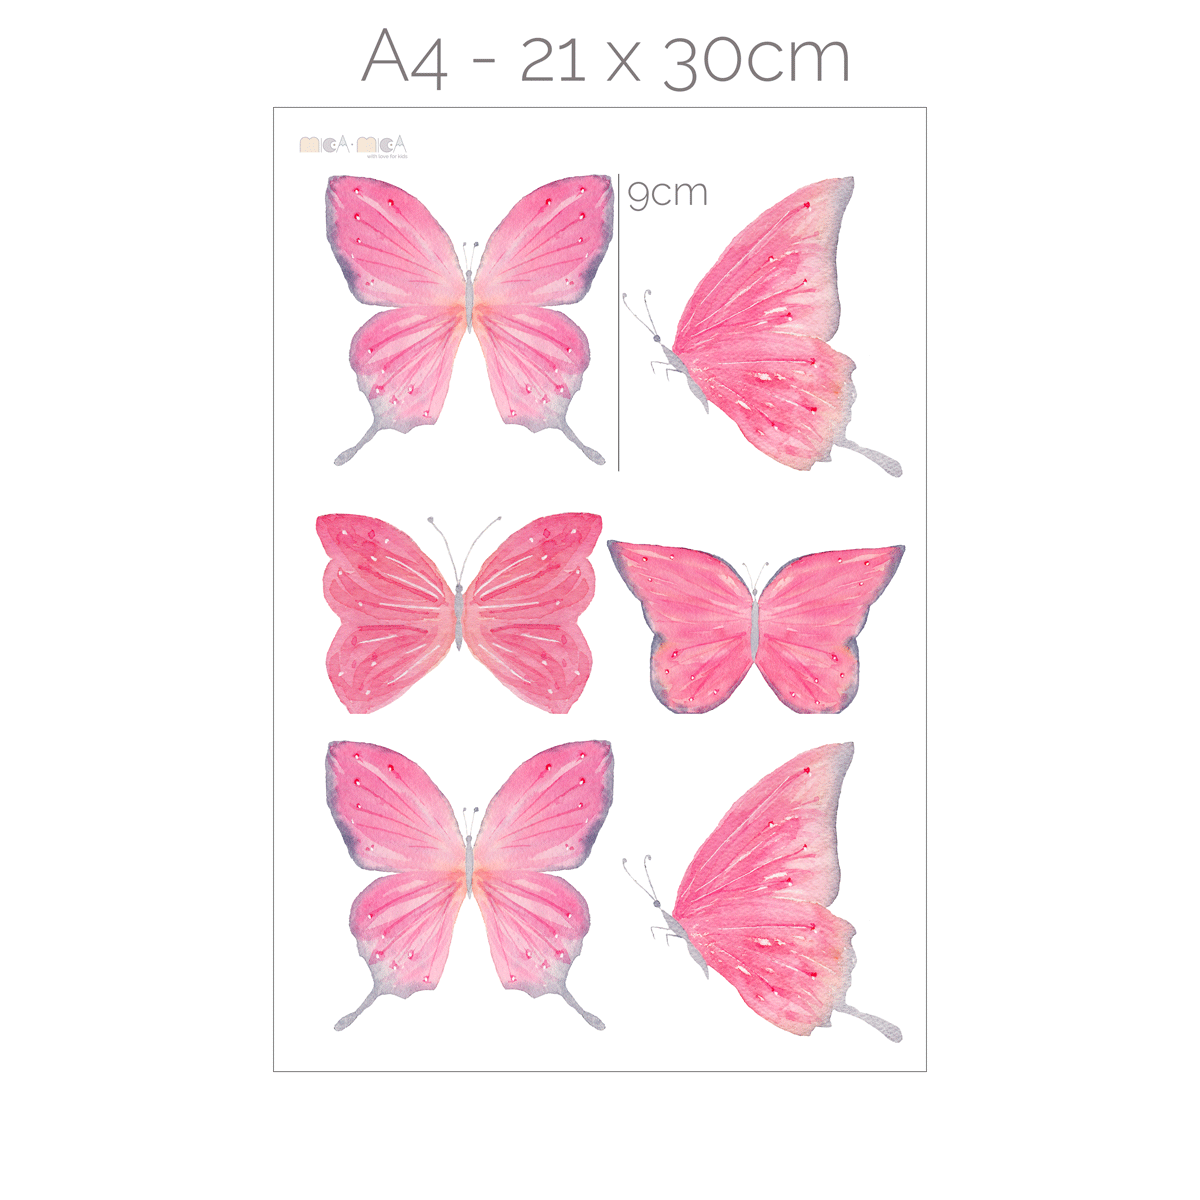 Butterfly wall stickers - Pink